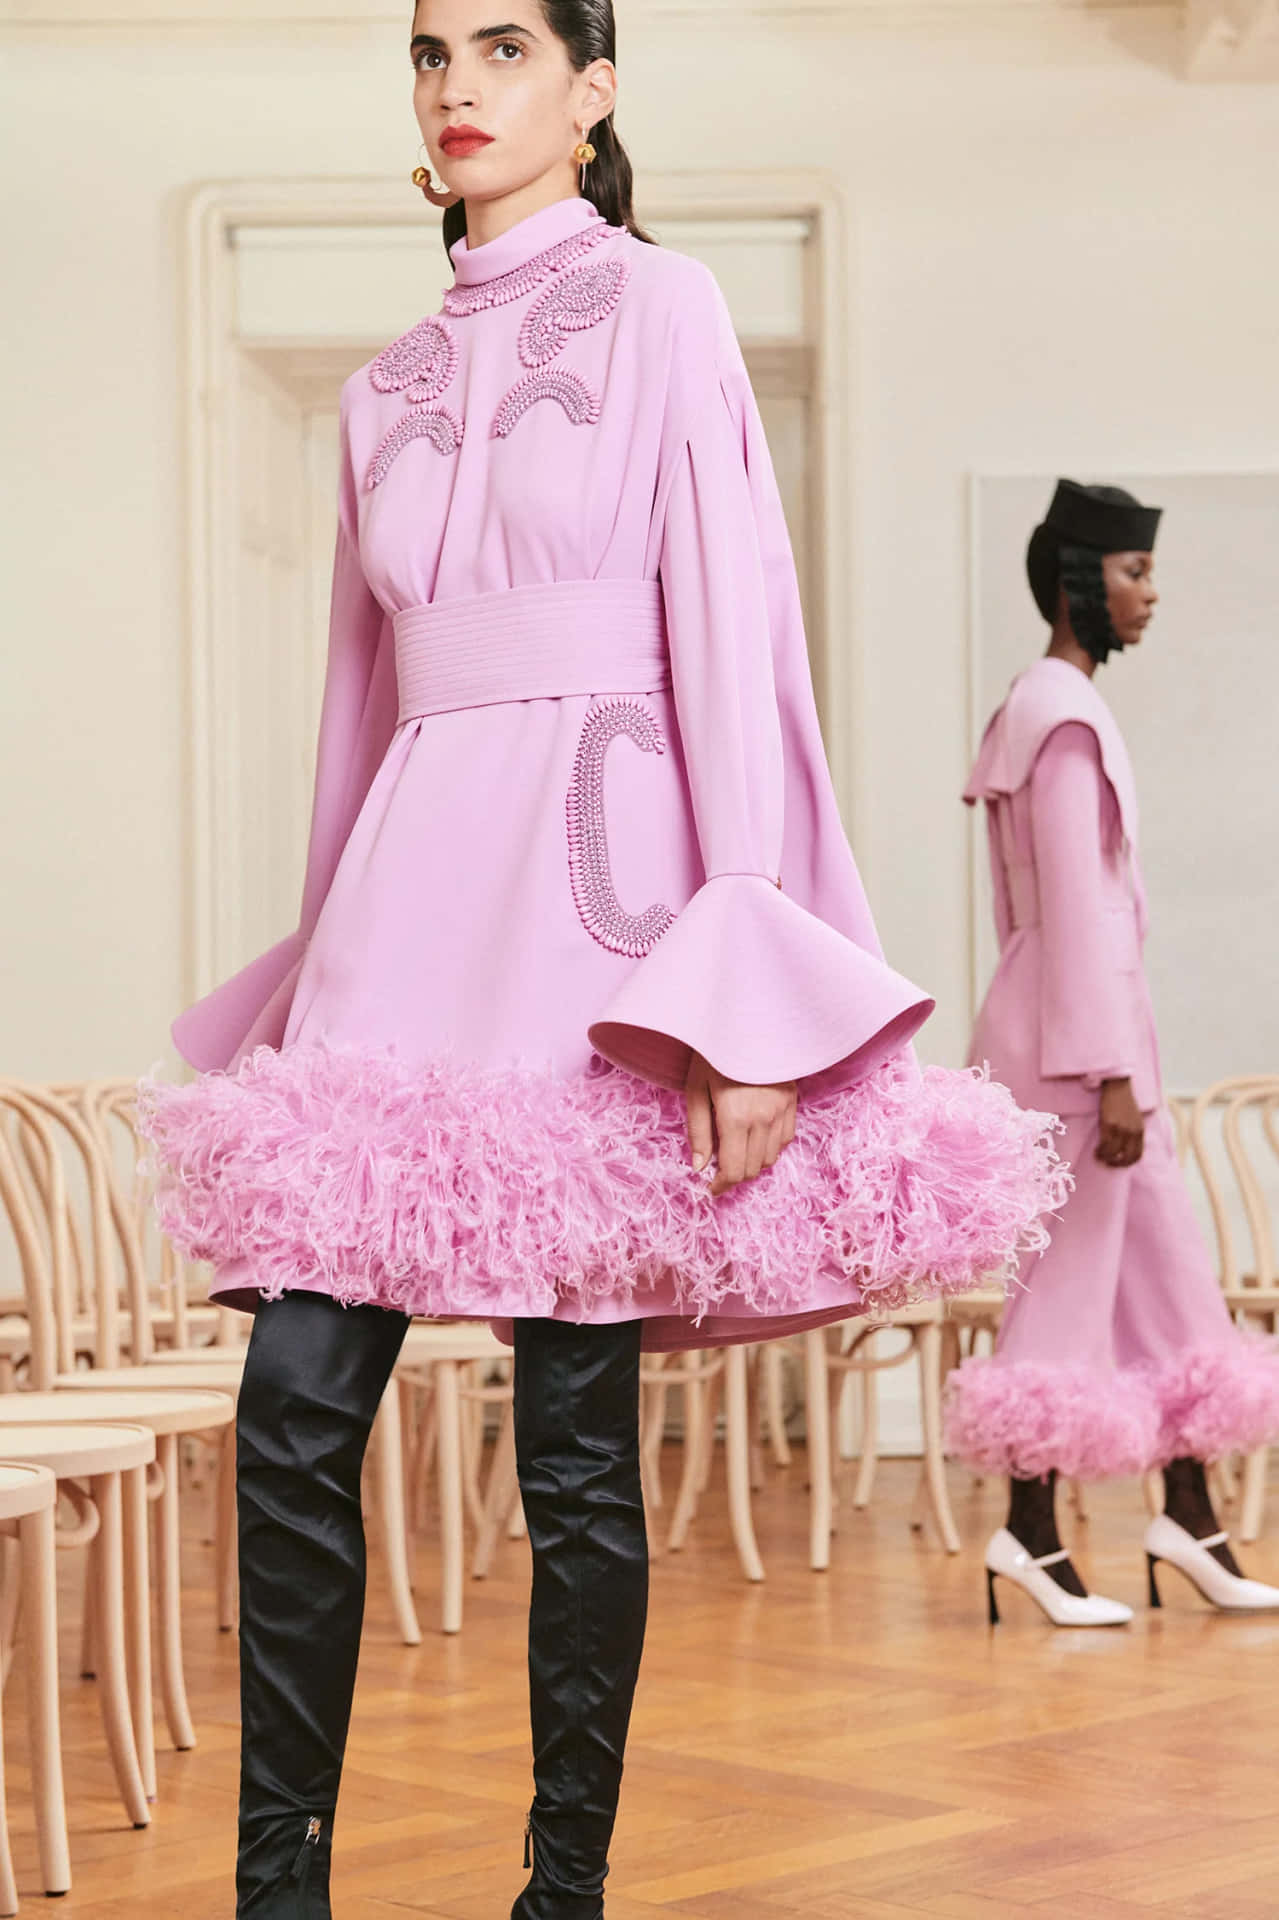 Patou's Pink Feather Cape Dress in a Stunning Pose Wallpaper